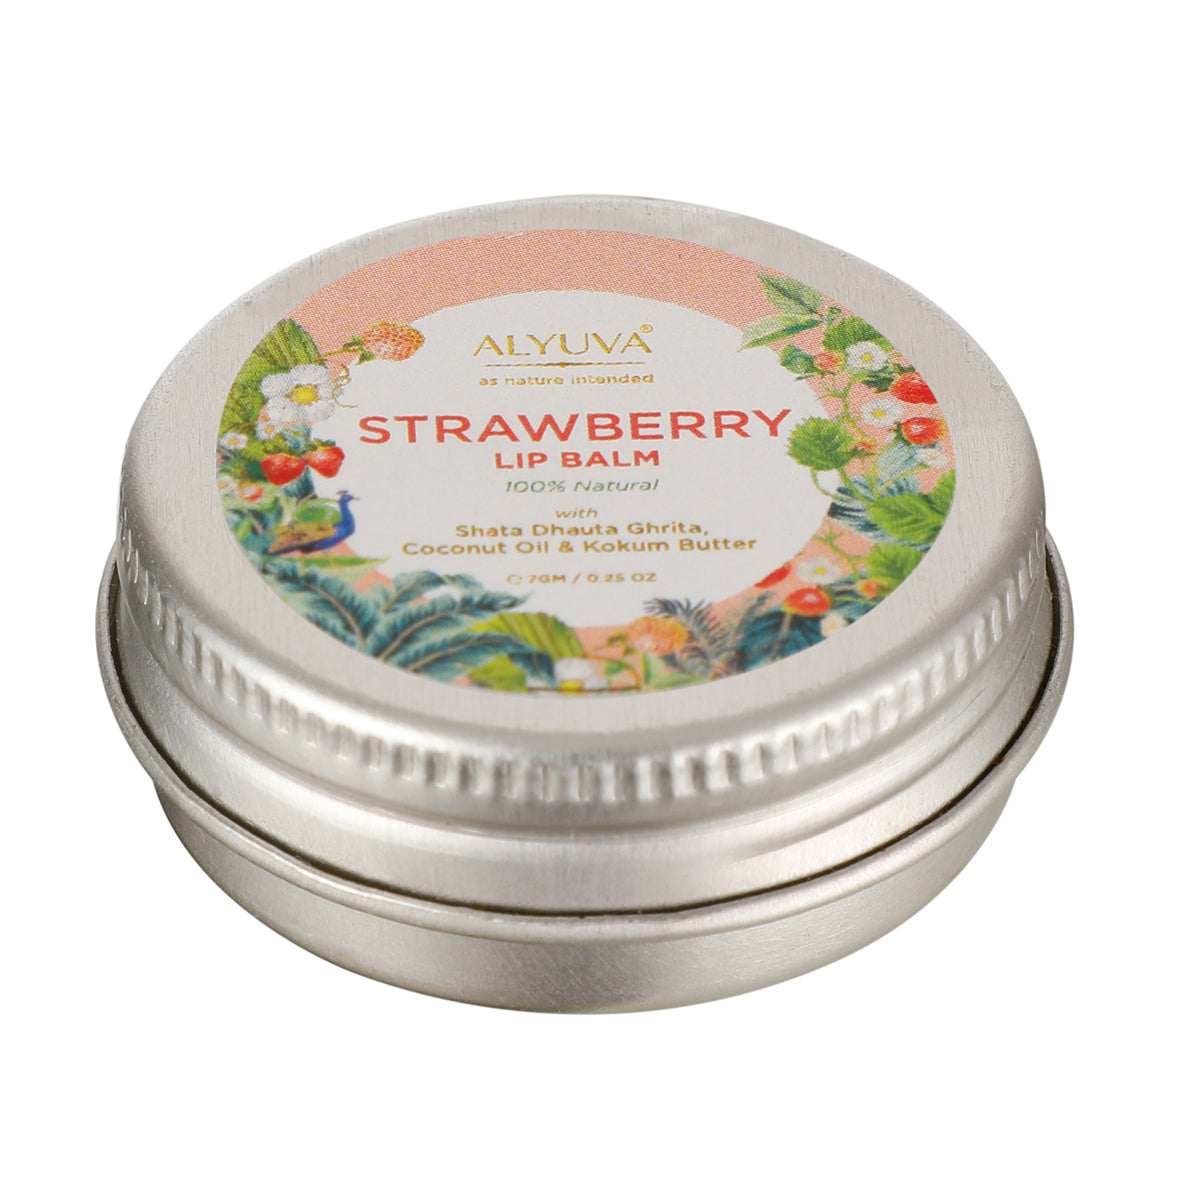 Strawberry Lip Balm, Natural & Herbal Ingredients, Ghee based, Unisex for all ages, 7gm, PACK OF 2